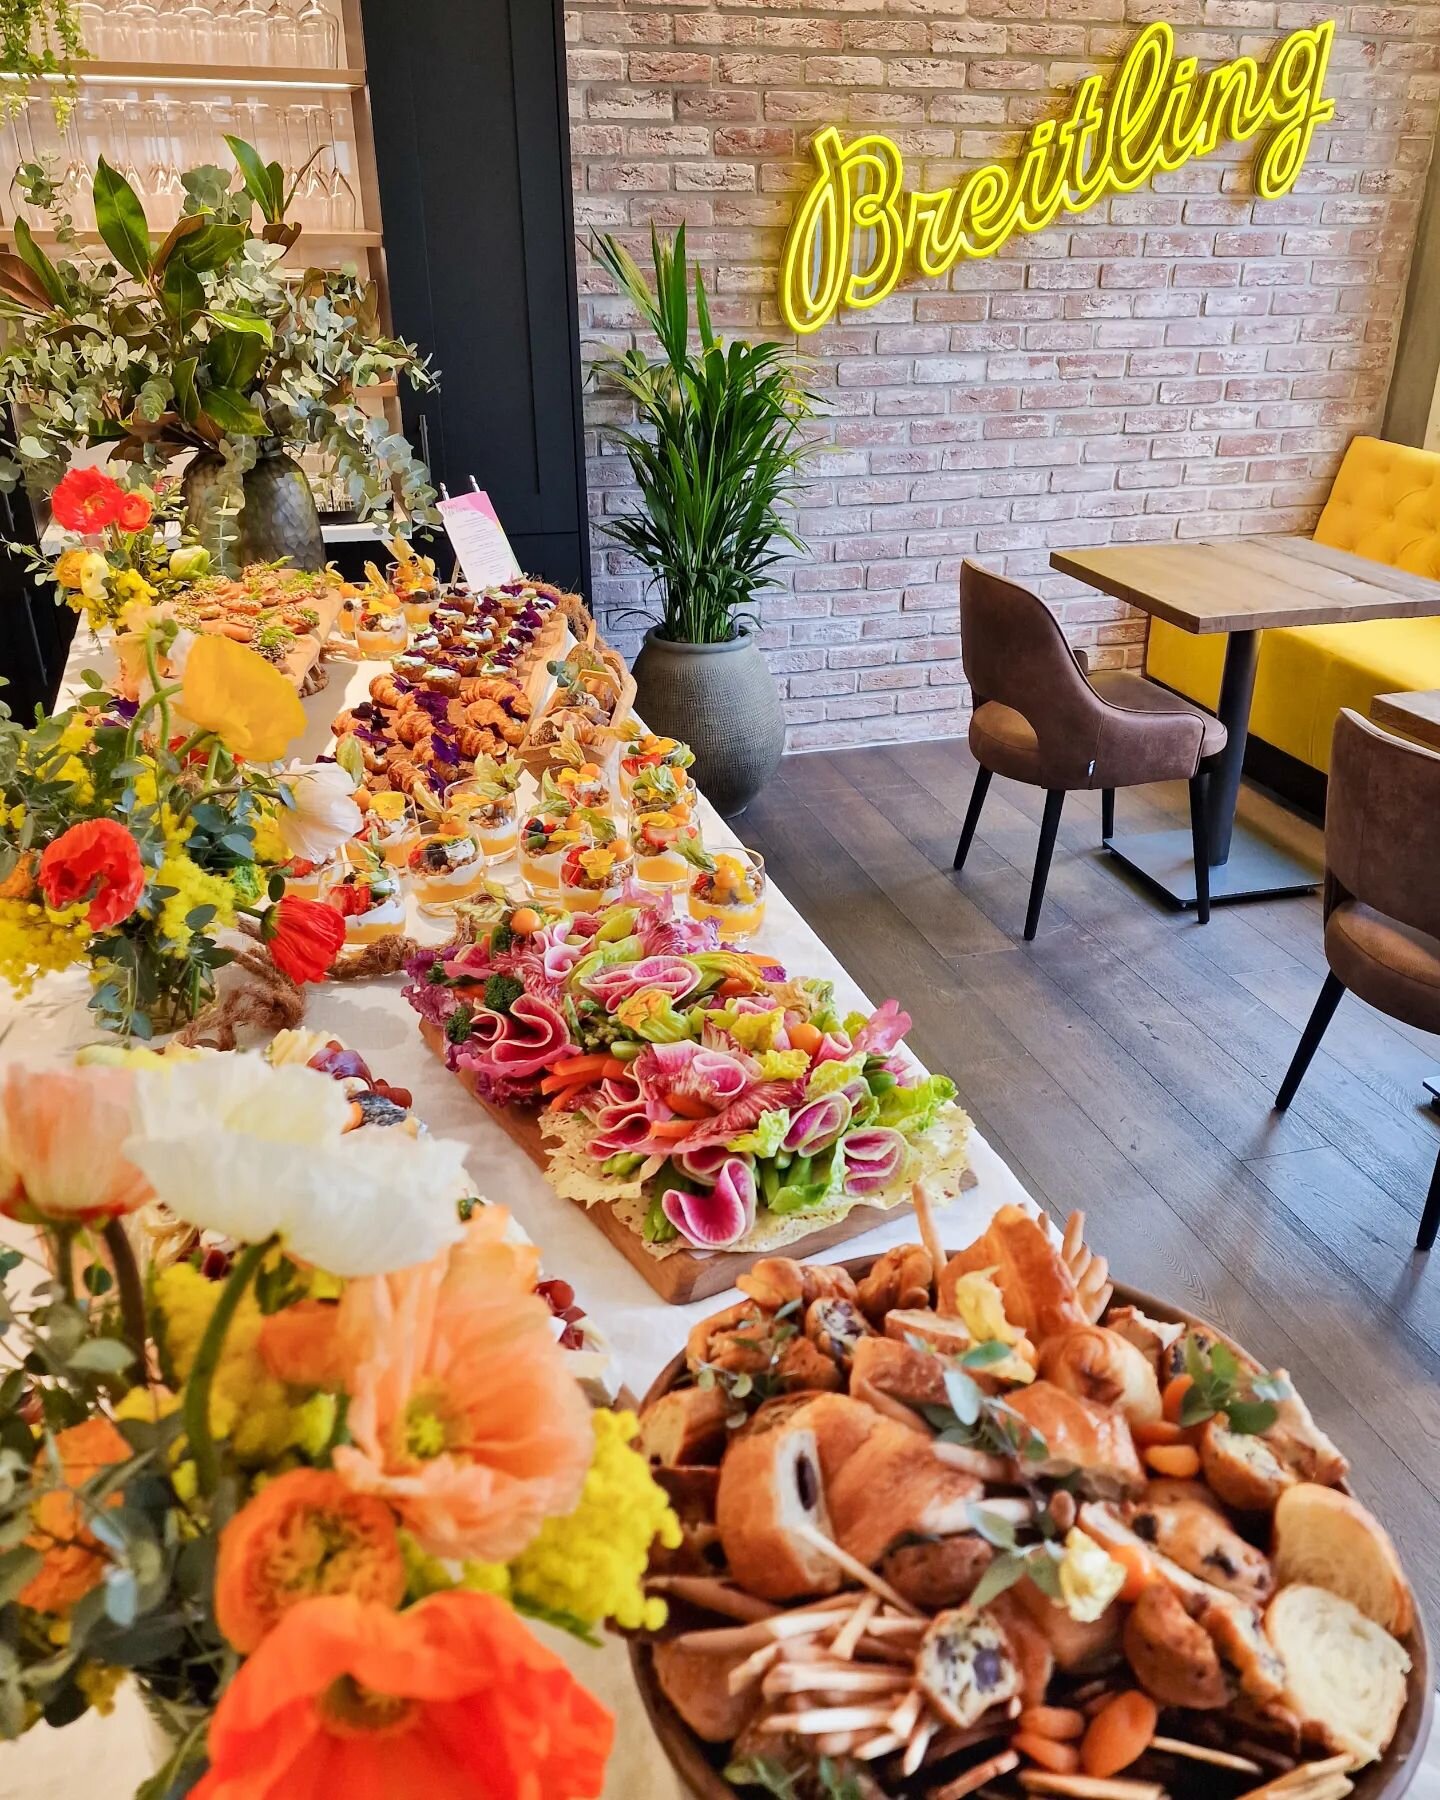 A colorful brunch set up for @breitling 💛 This custom mix of cheese, charcuterie, breakfast bites, yoghurt cups and crispy pastries is an excellent choice for a wholesome morning snack!
.
.
.
.
.
.
#brunchboard #brunch #corporatebrunch #grazingtable